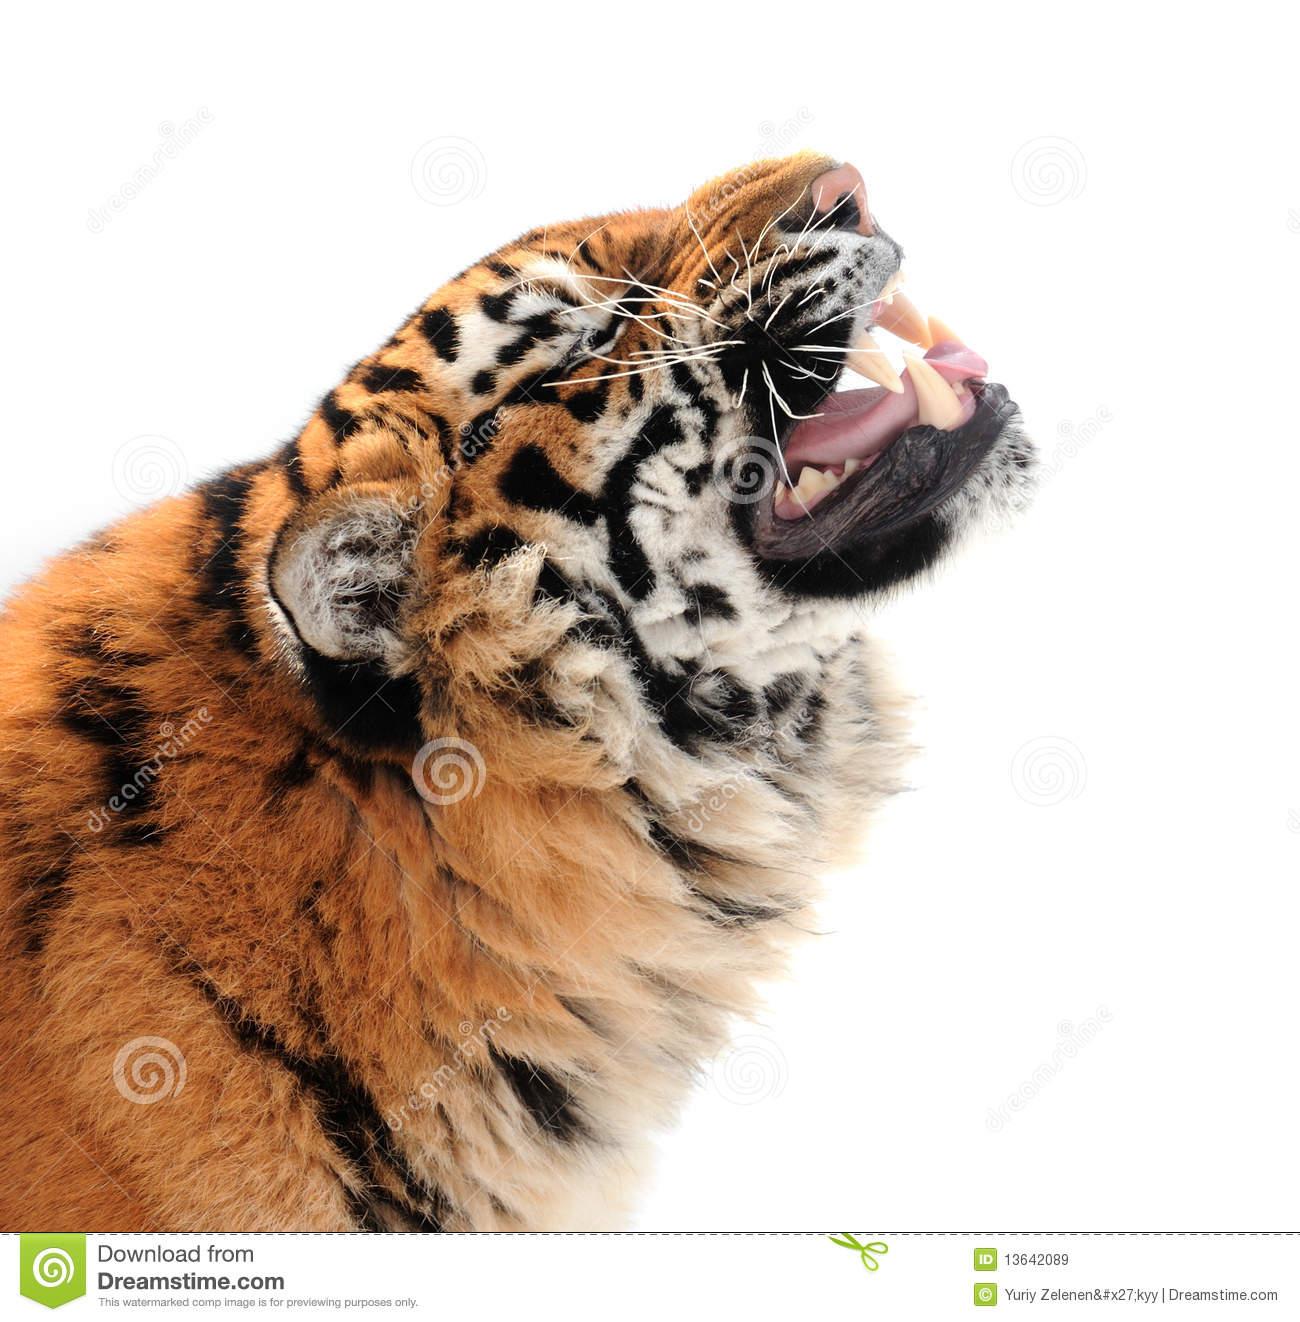 Tiger With Bared Fangs Royalty Free Stock Images   Image  13642089